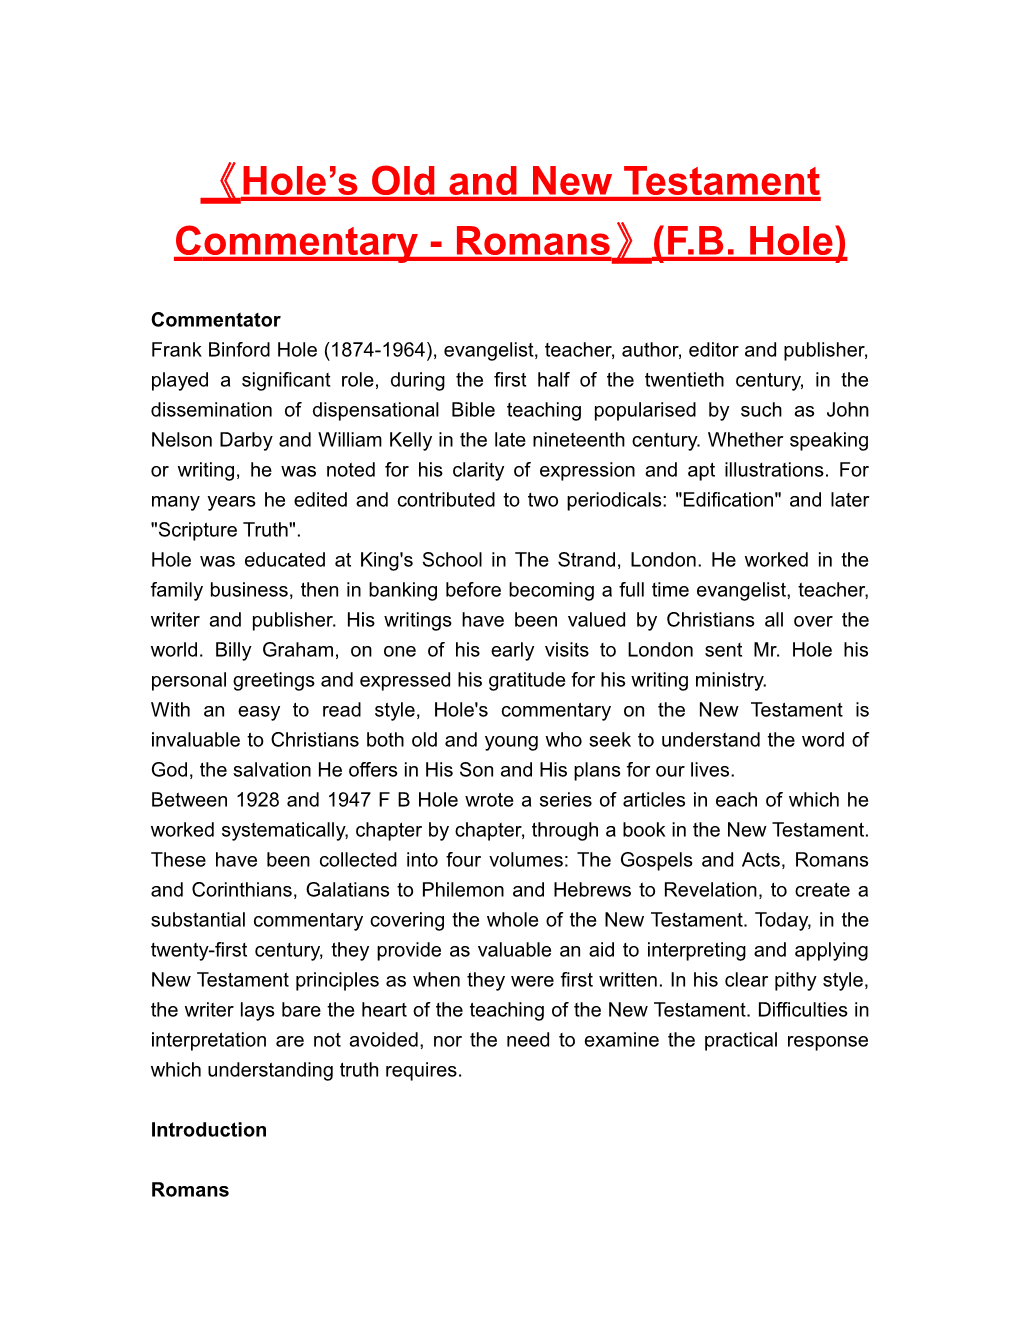 Hole S Old and New Testamentcommentary-Romans (F.B. Hole)